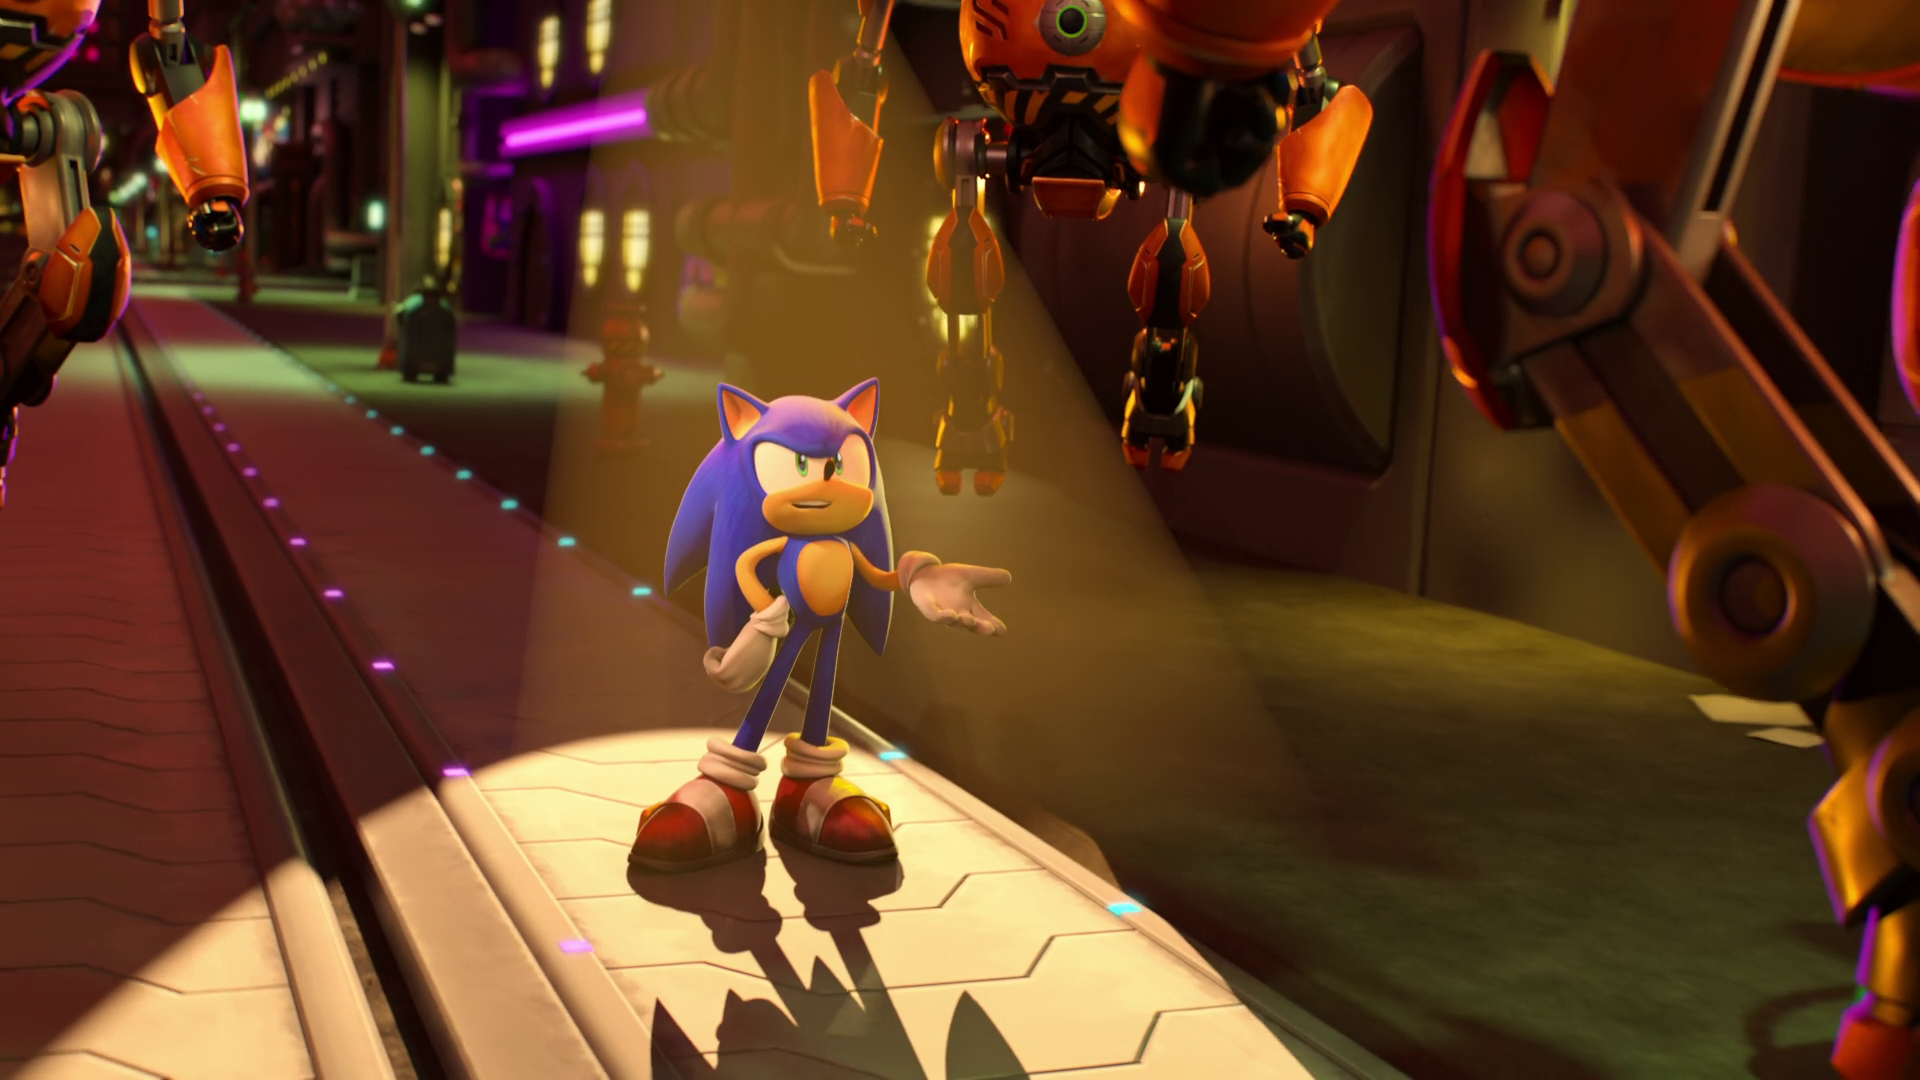 Sonic Prime planned to debut in mid-December, according to